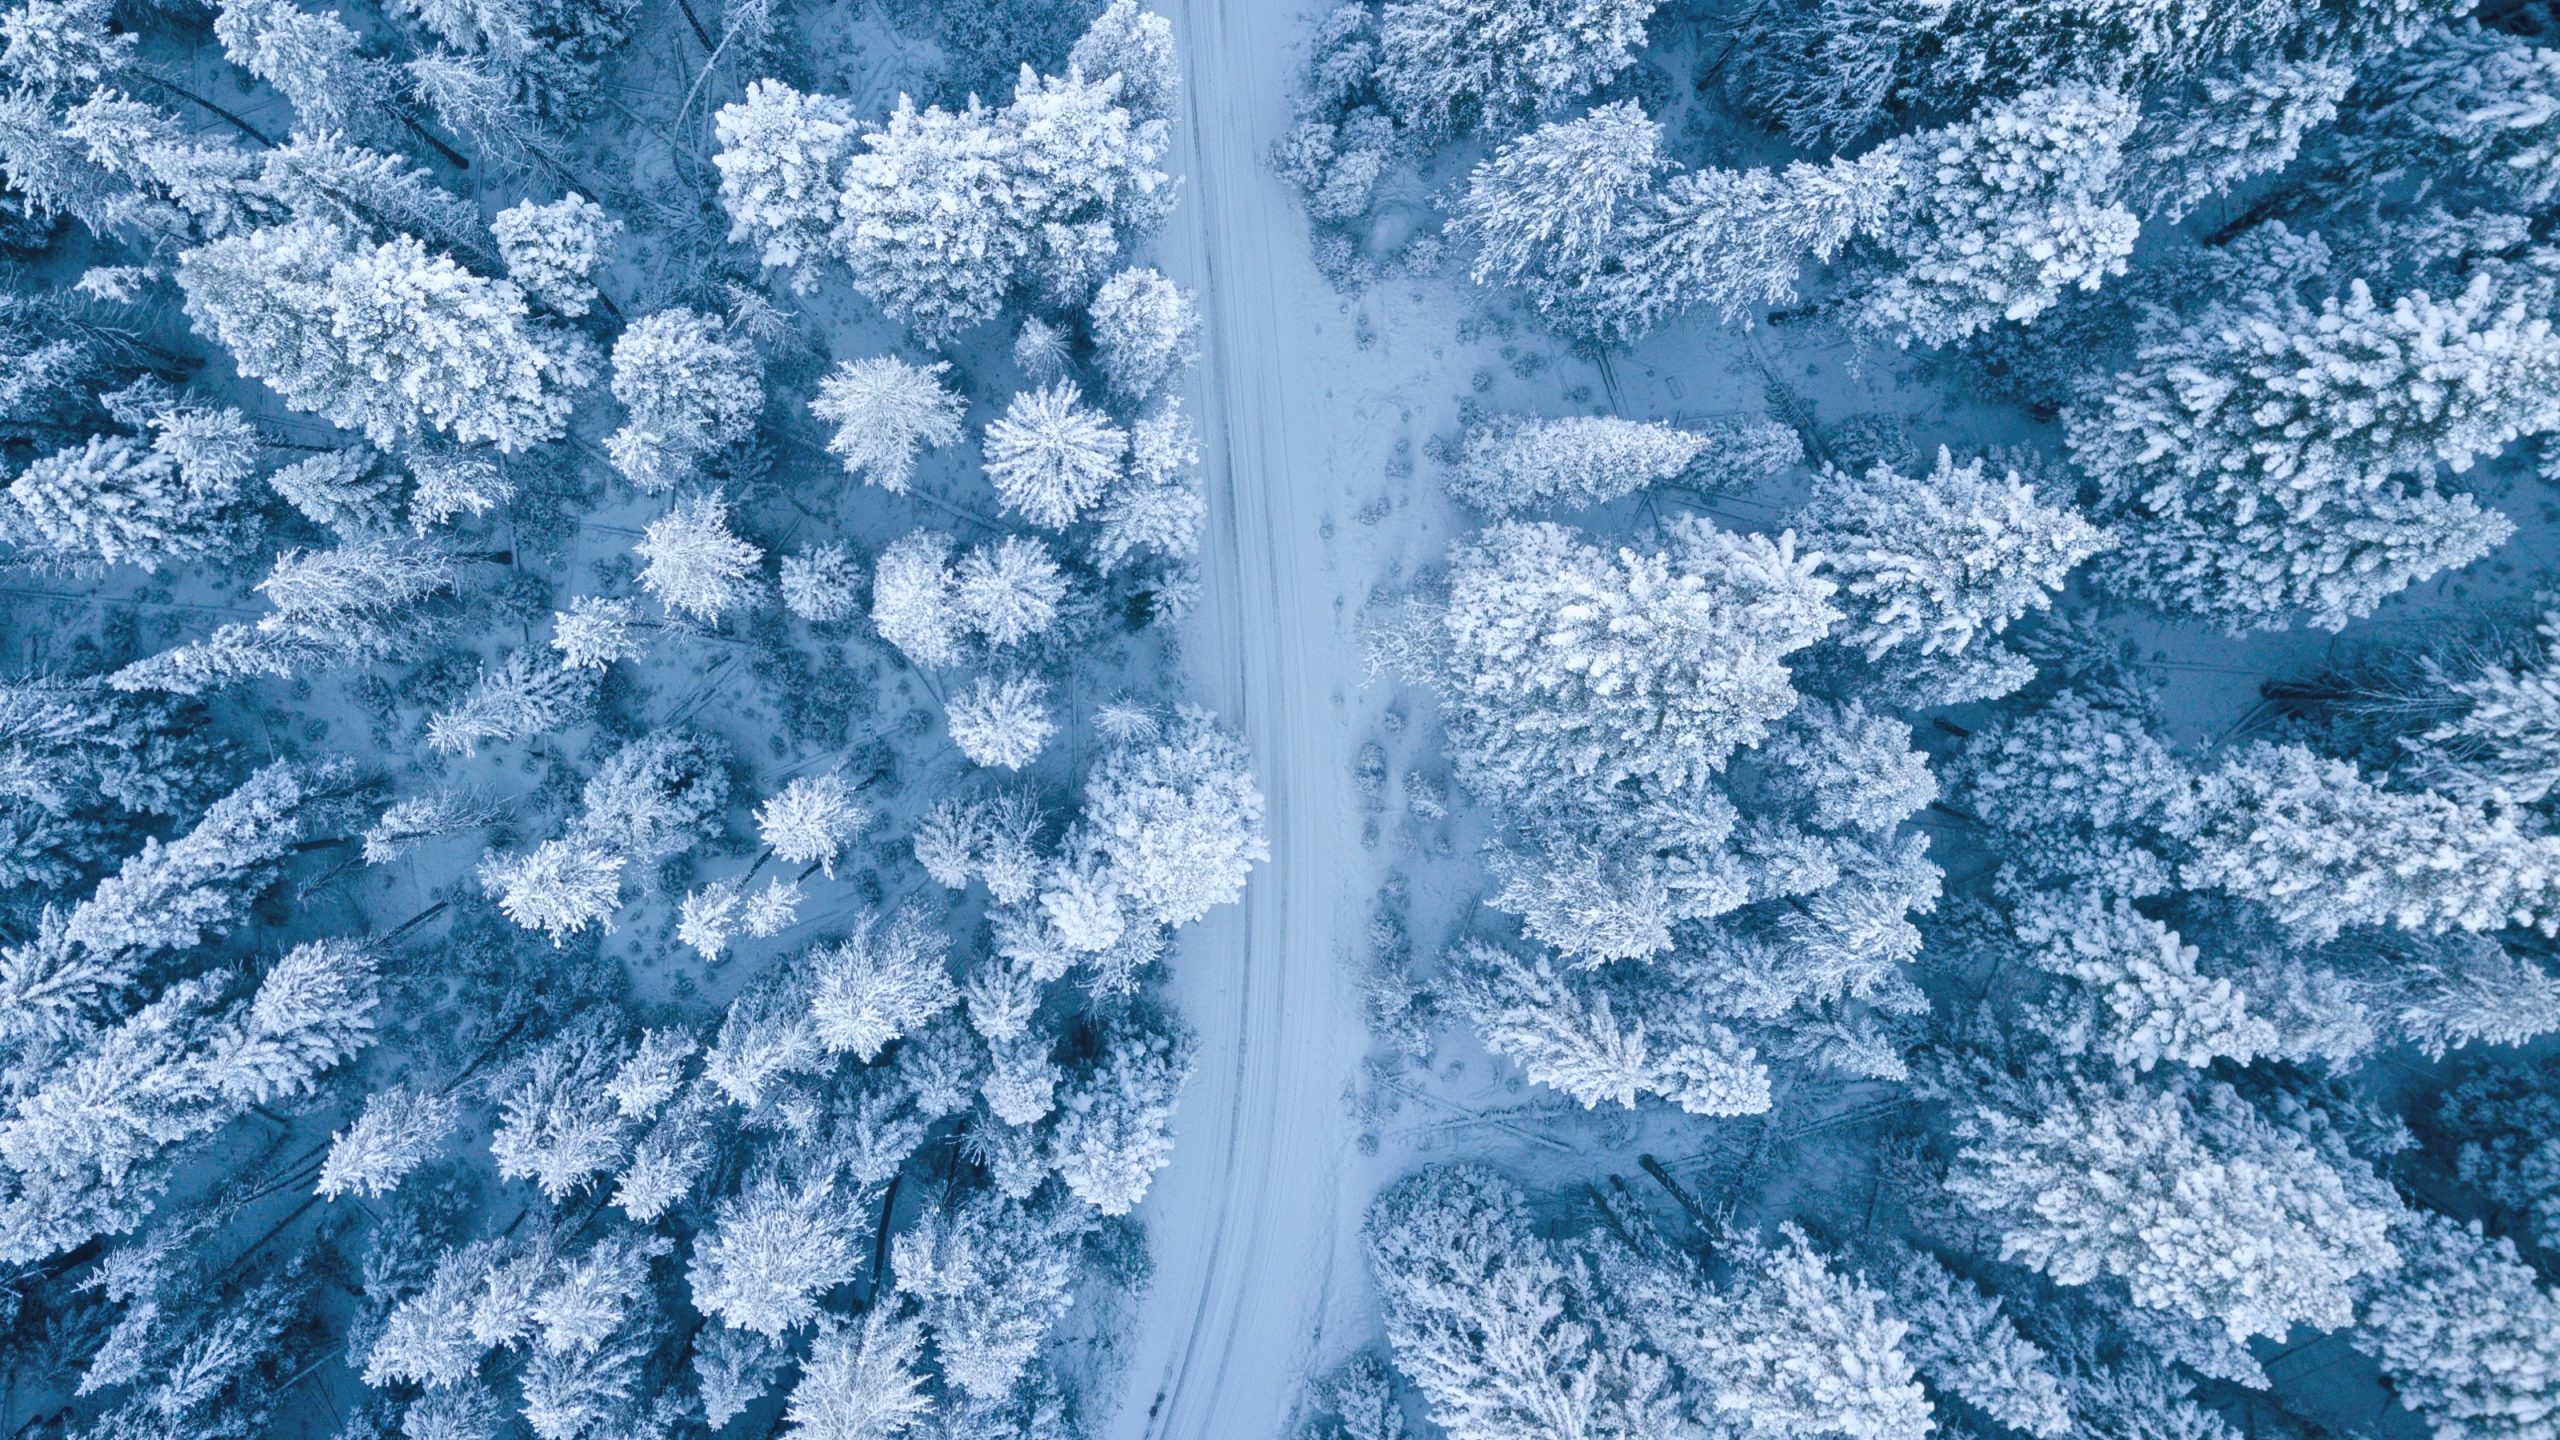 Aerial view of a snow-covered road running through a snowy wooded area